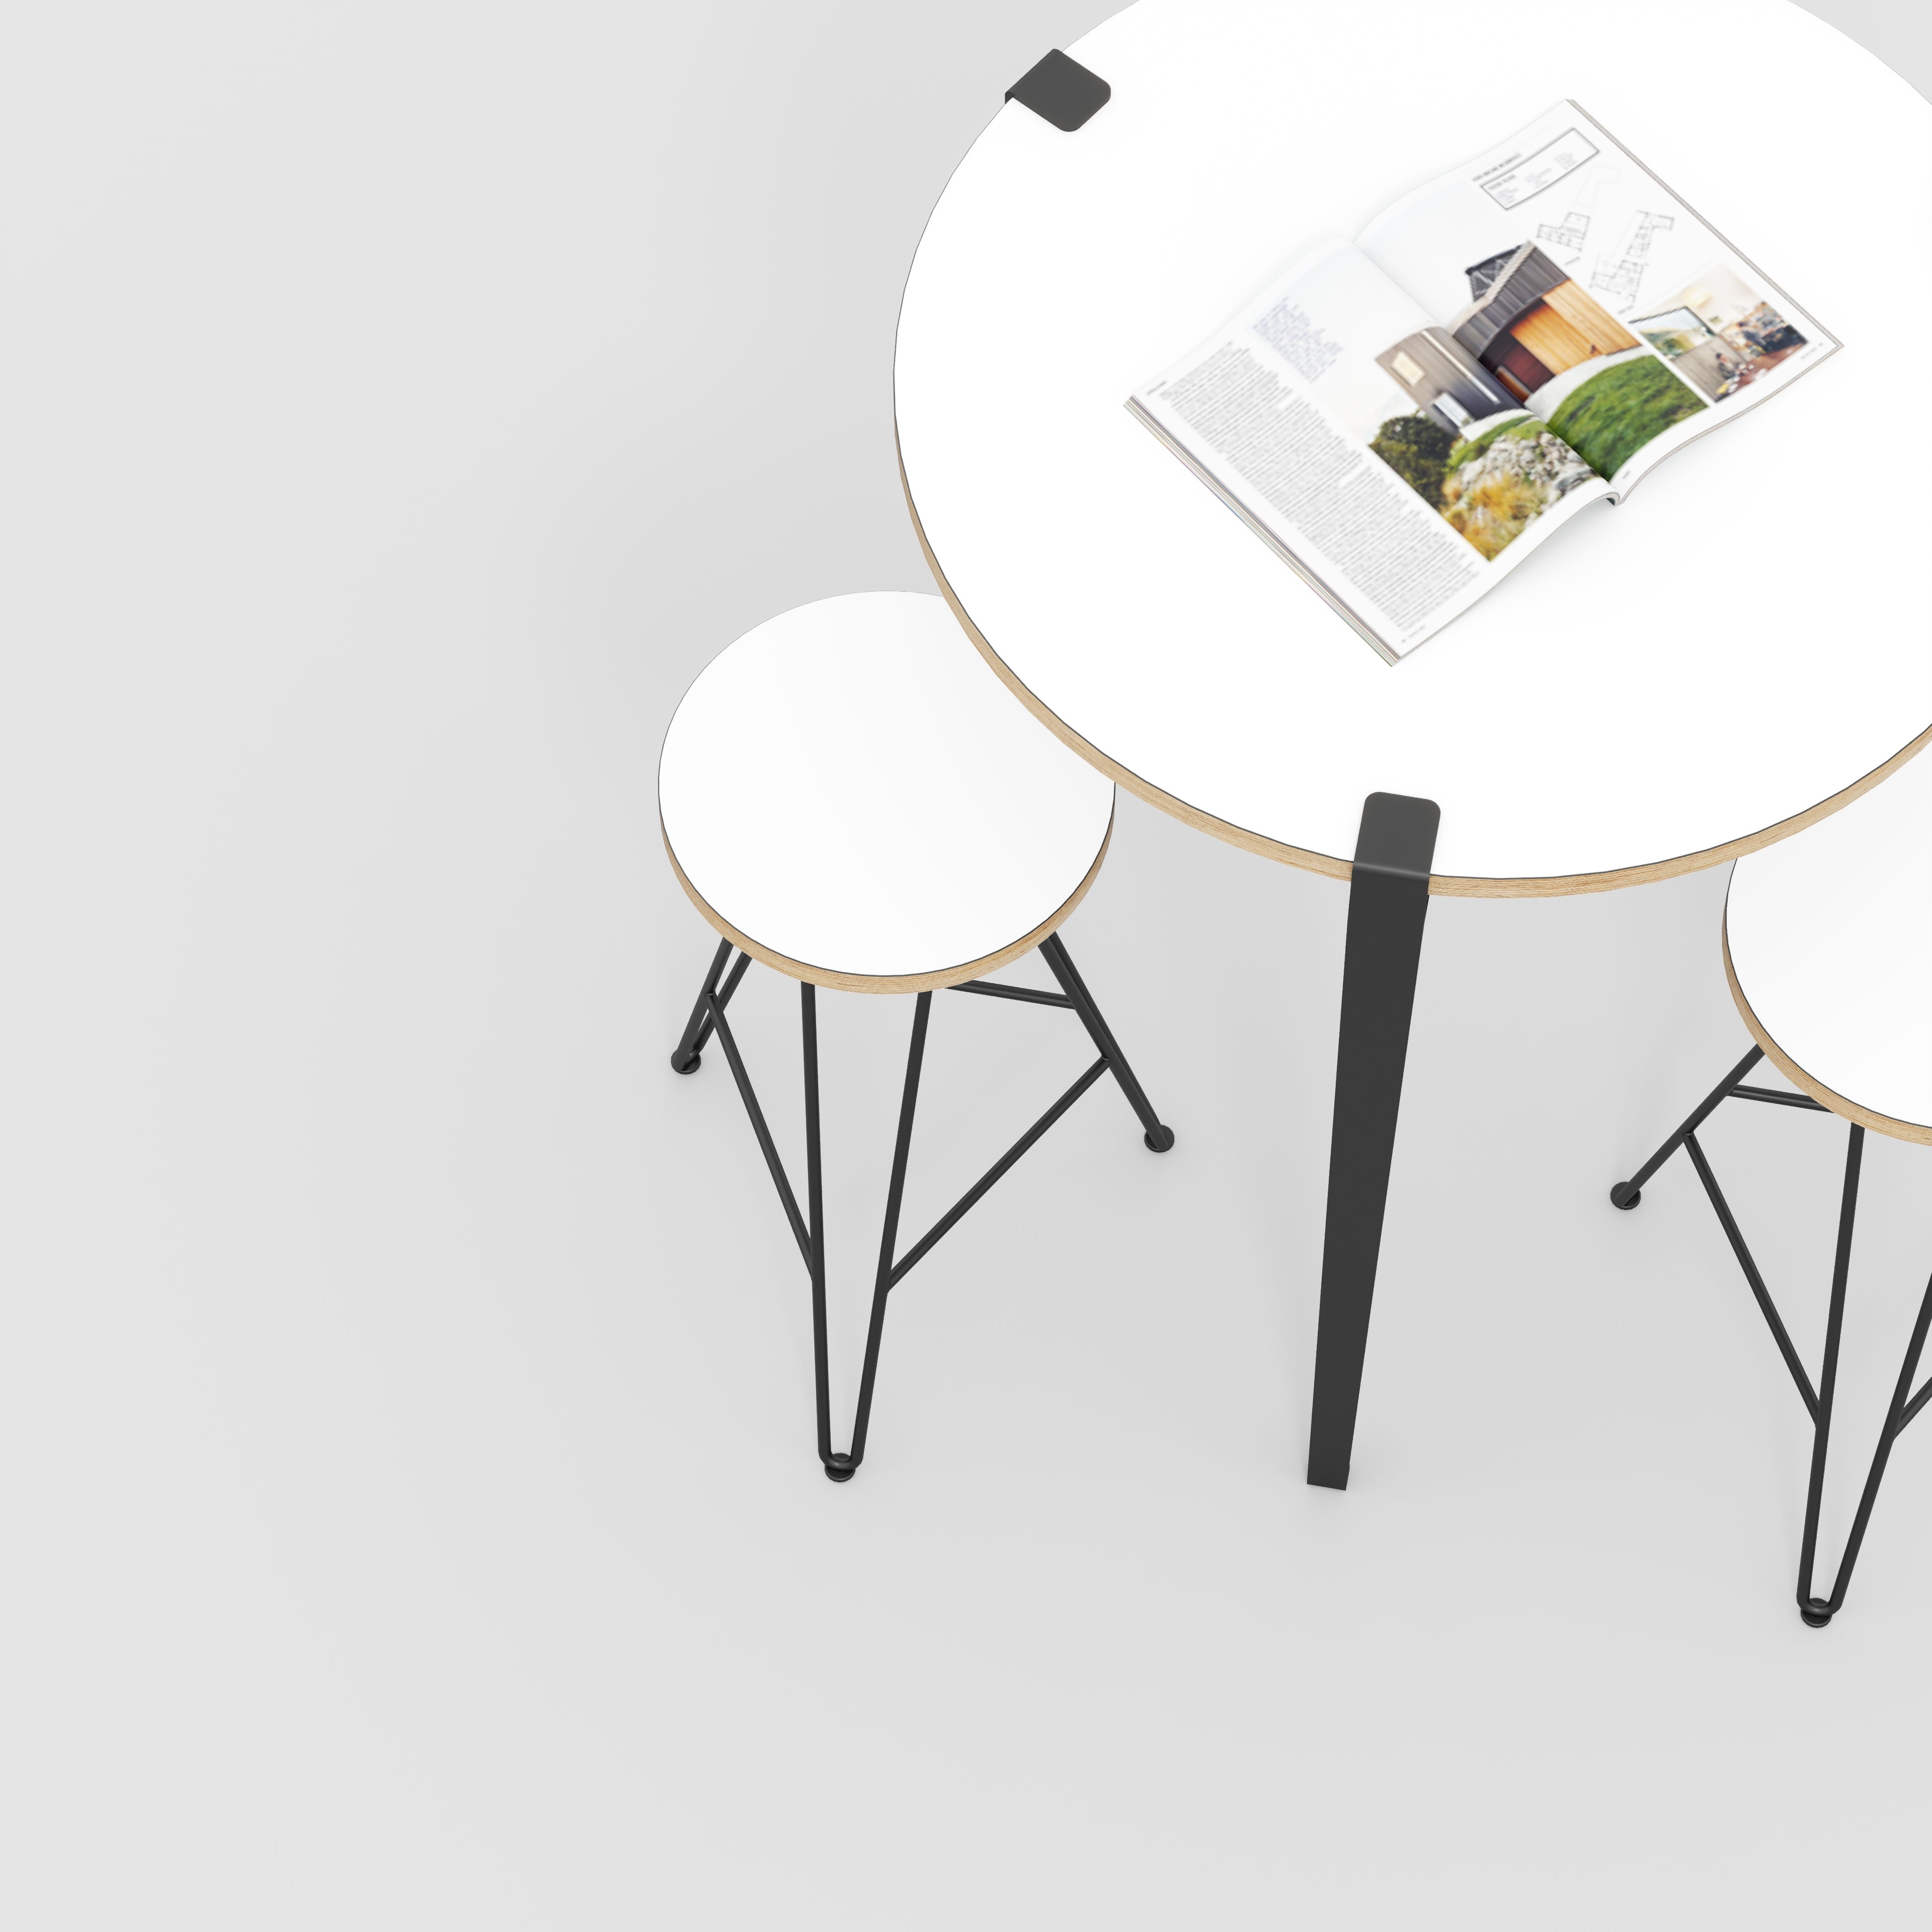 Round Table with Black Tiptoe Legs - Formica White - 800(dia) x 900(h)